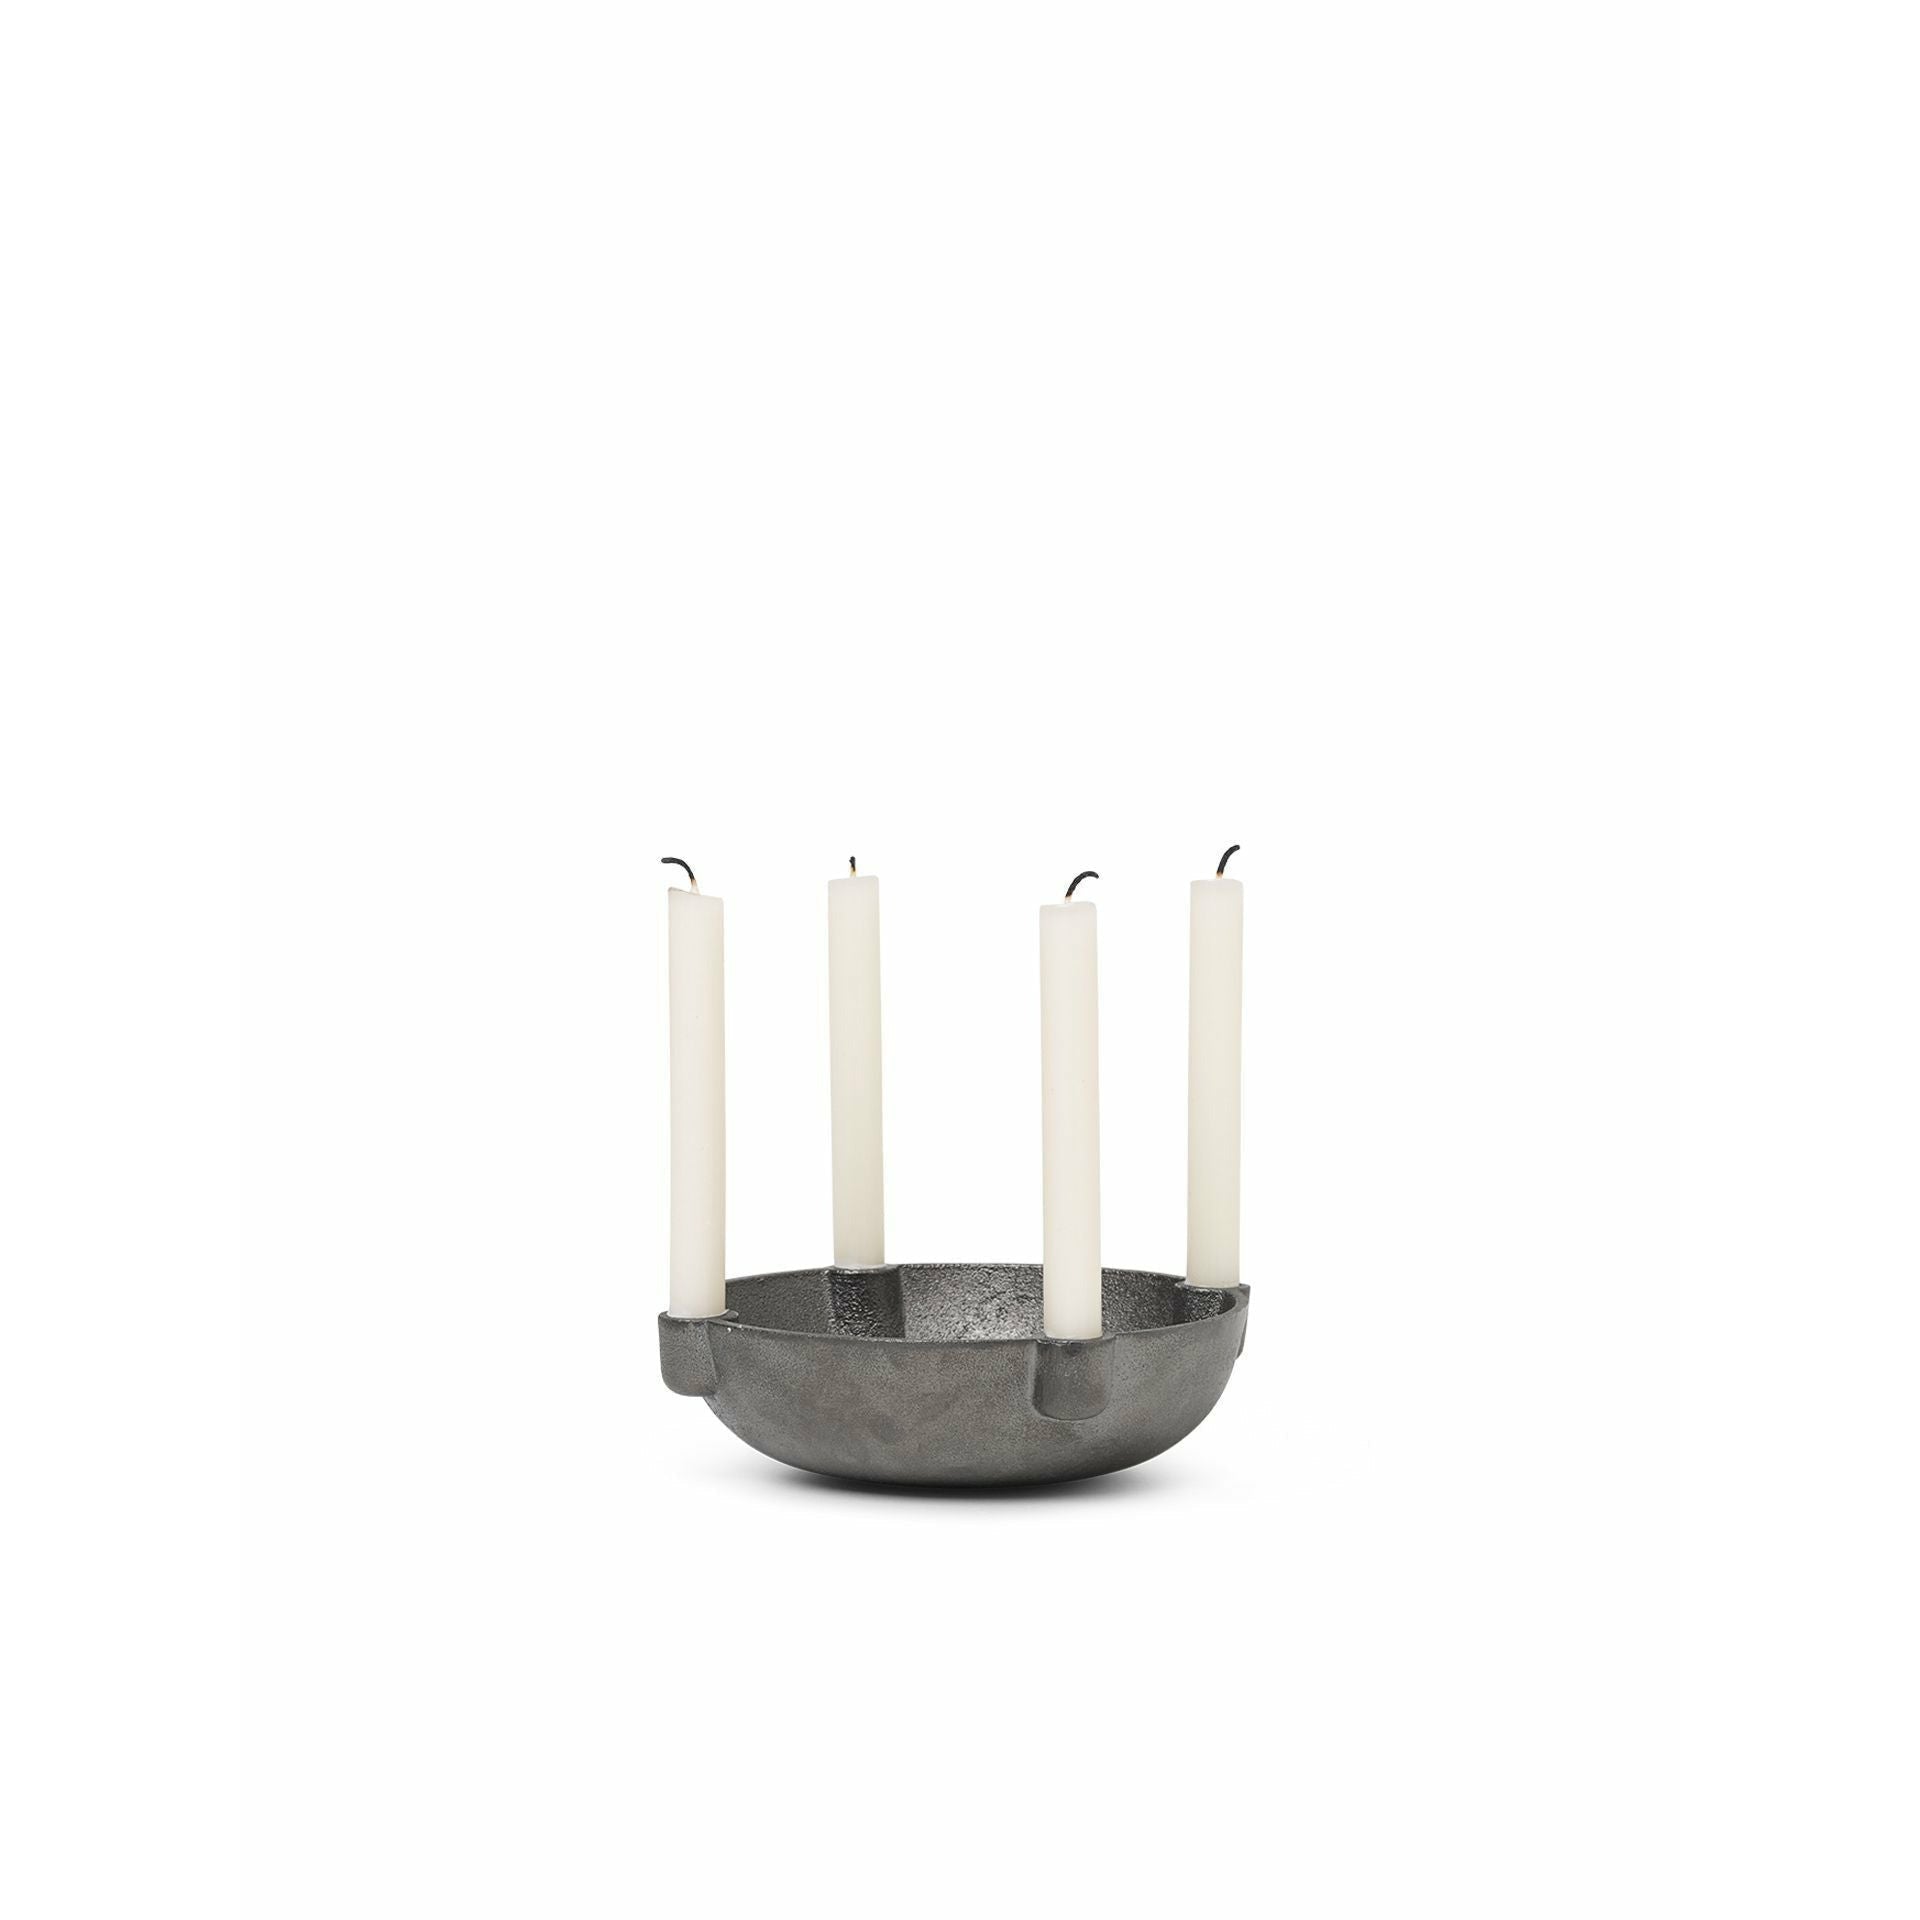 Ferm Living Bowl Candle Holder Small, Black Brass